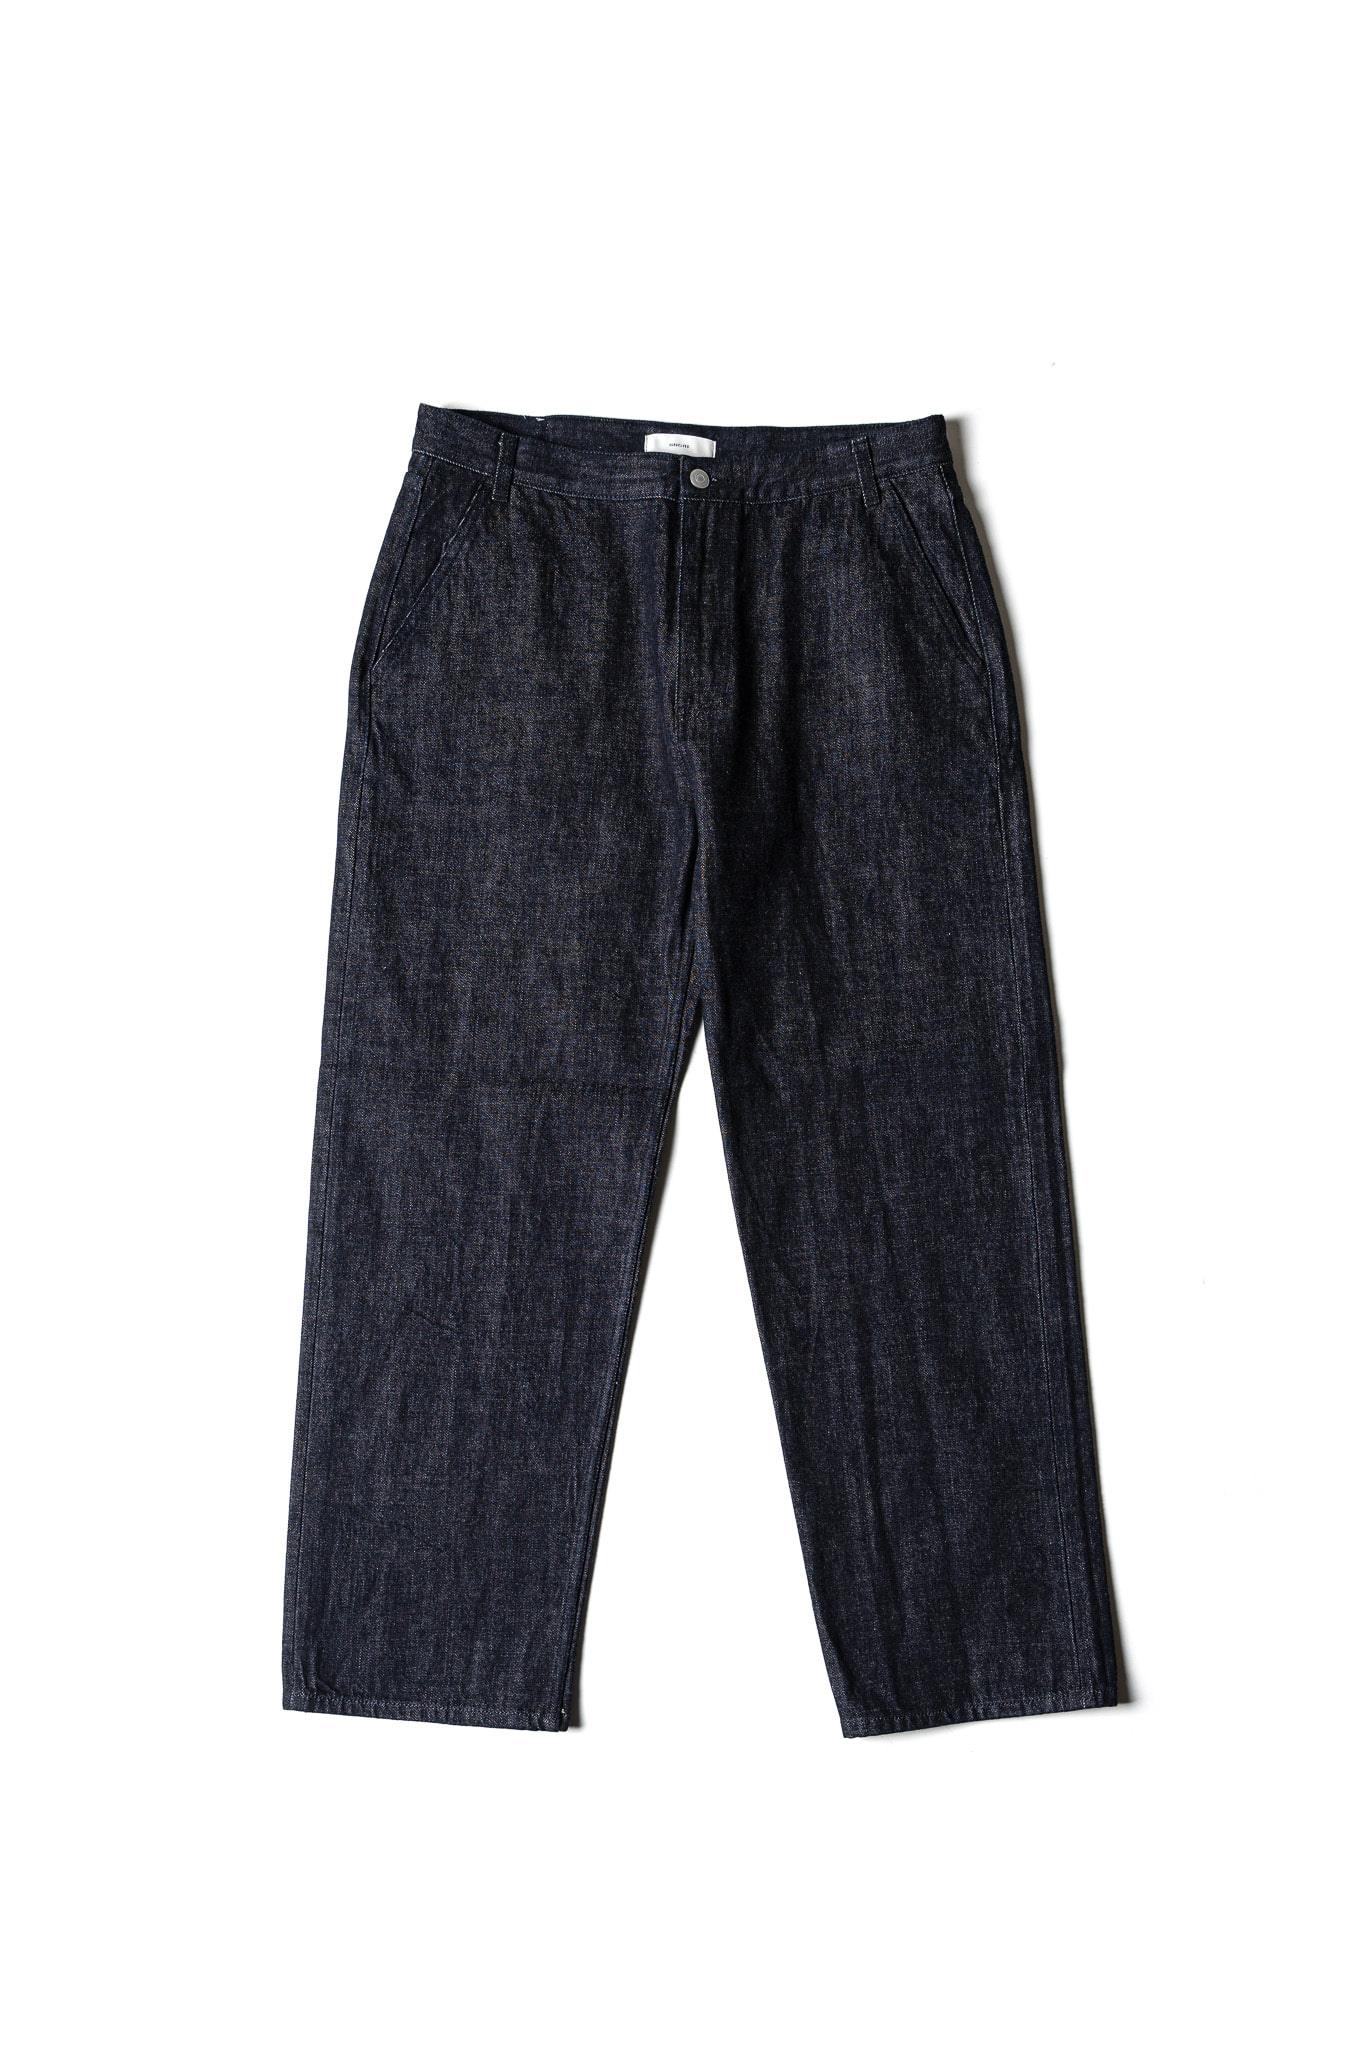 ORGANIC COTTON RELAXED DENIM PANTS (one-wash)